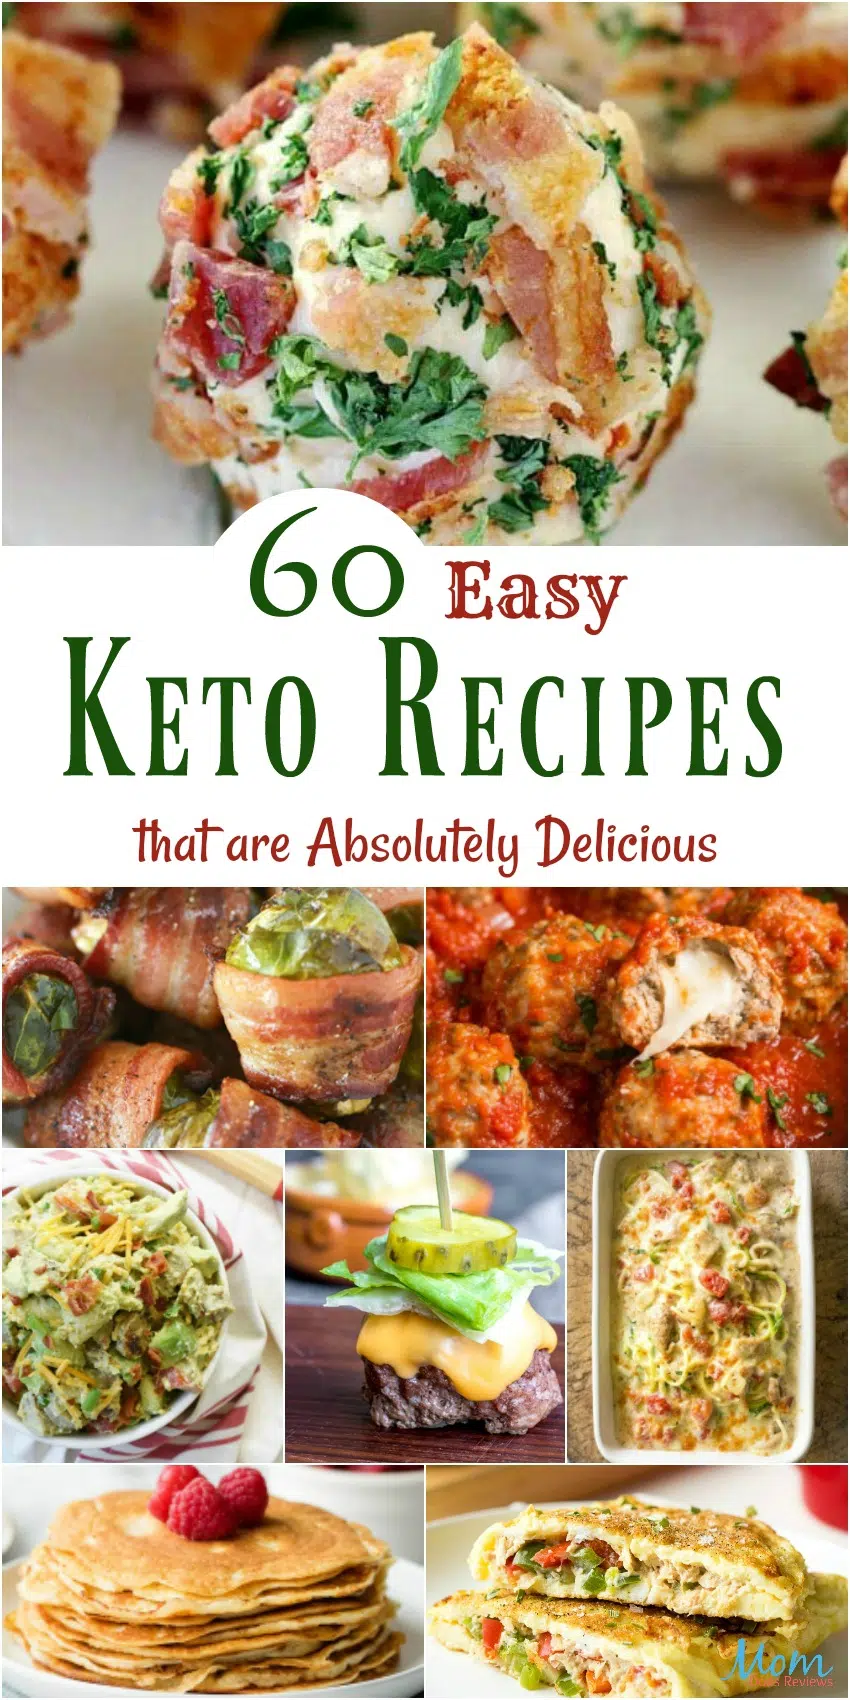 60 Easy Keto Recipes that are Absolutely Delicious #KETO #recipe #ketogenicdiet #diet #recipes #foodie